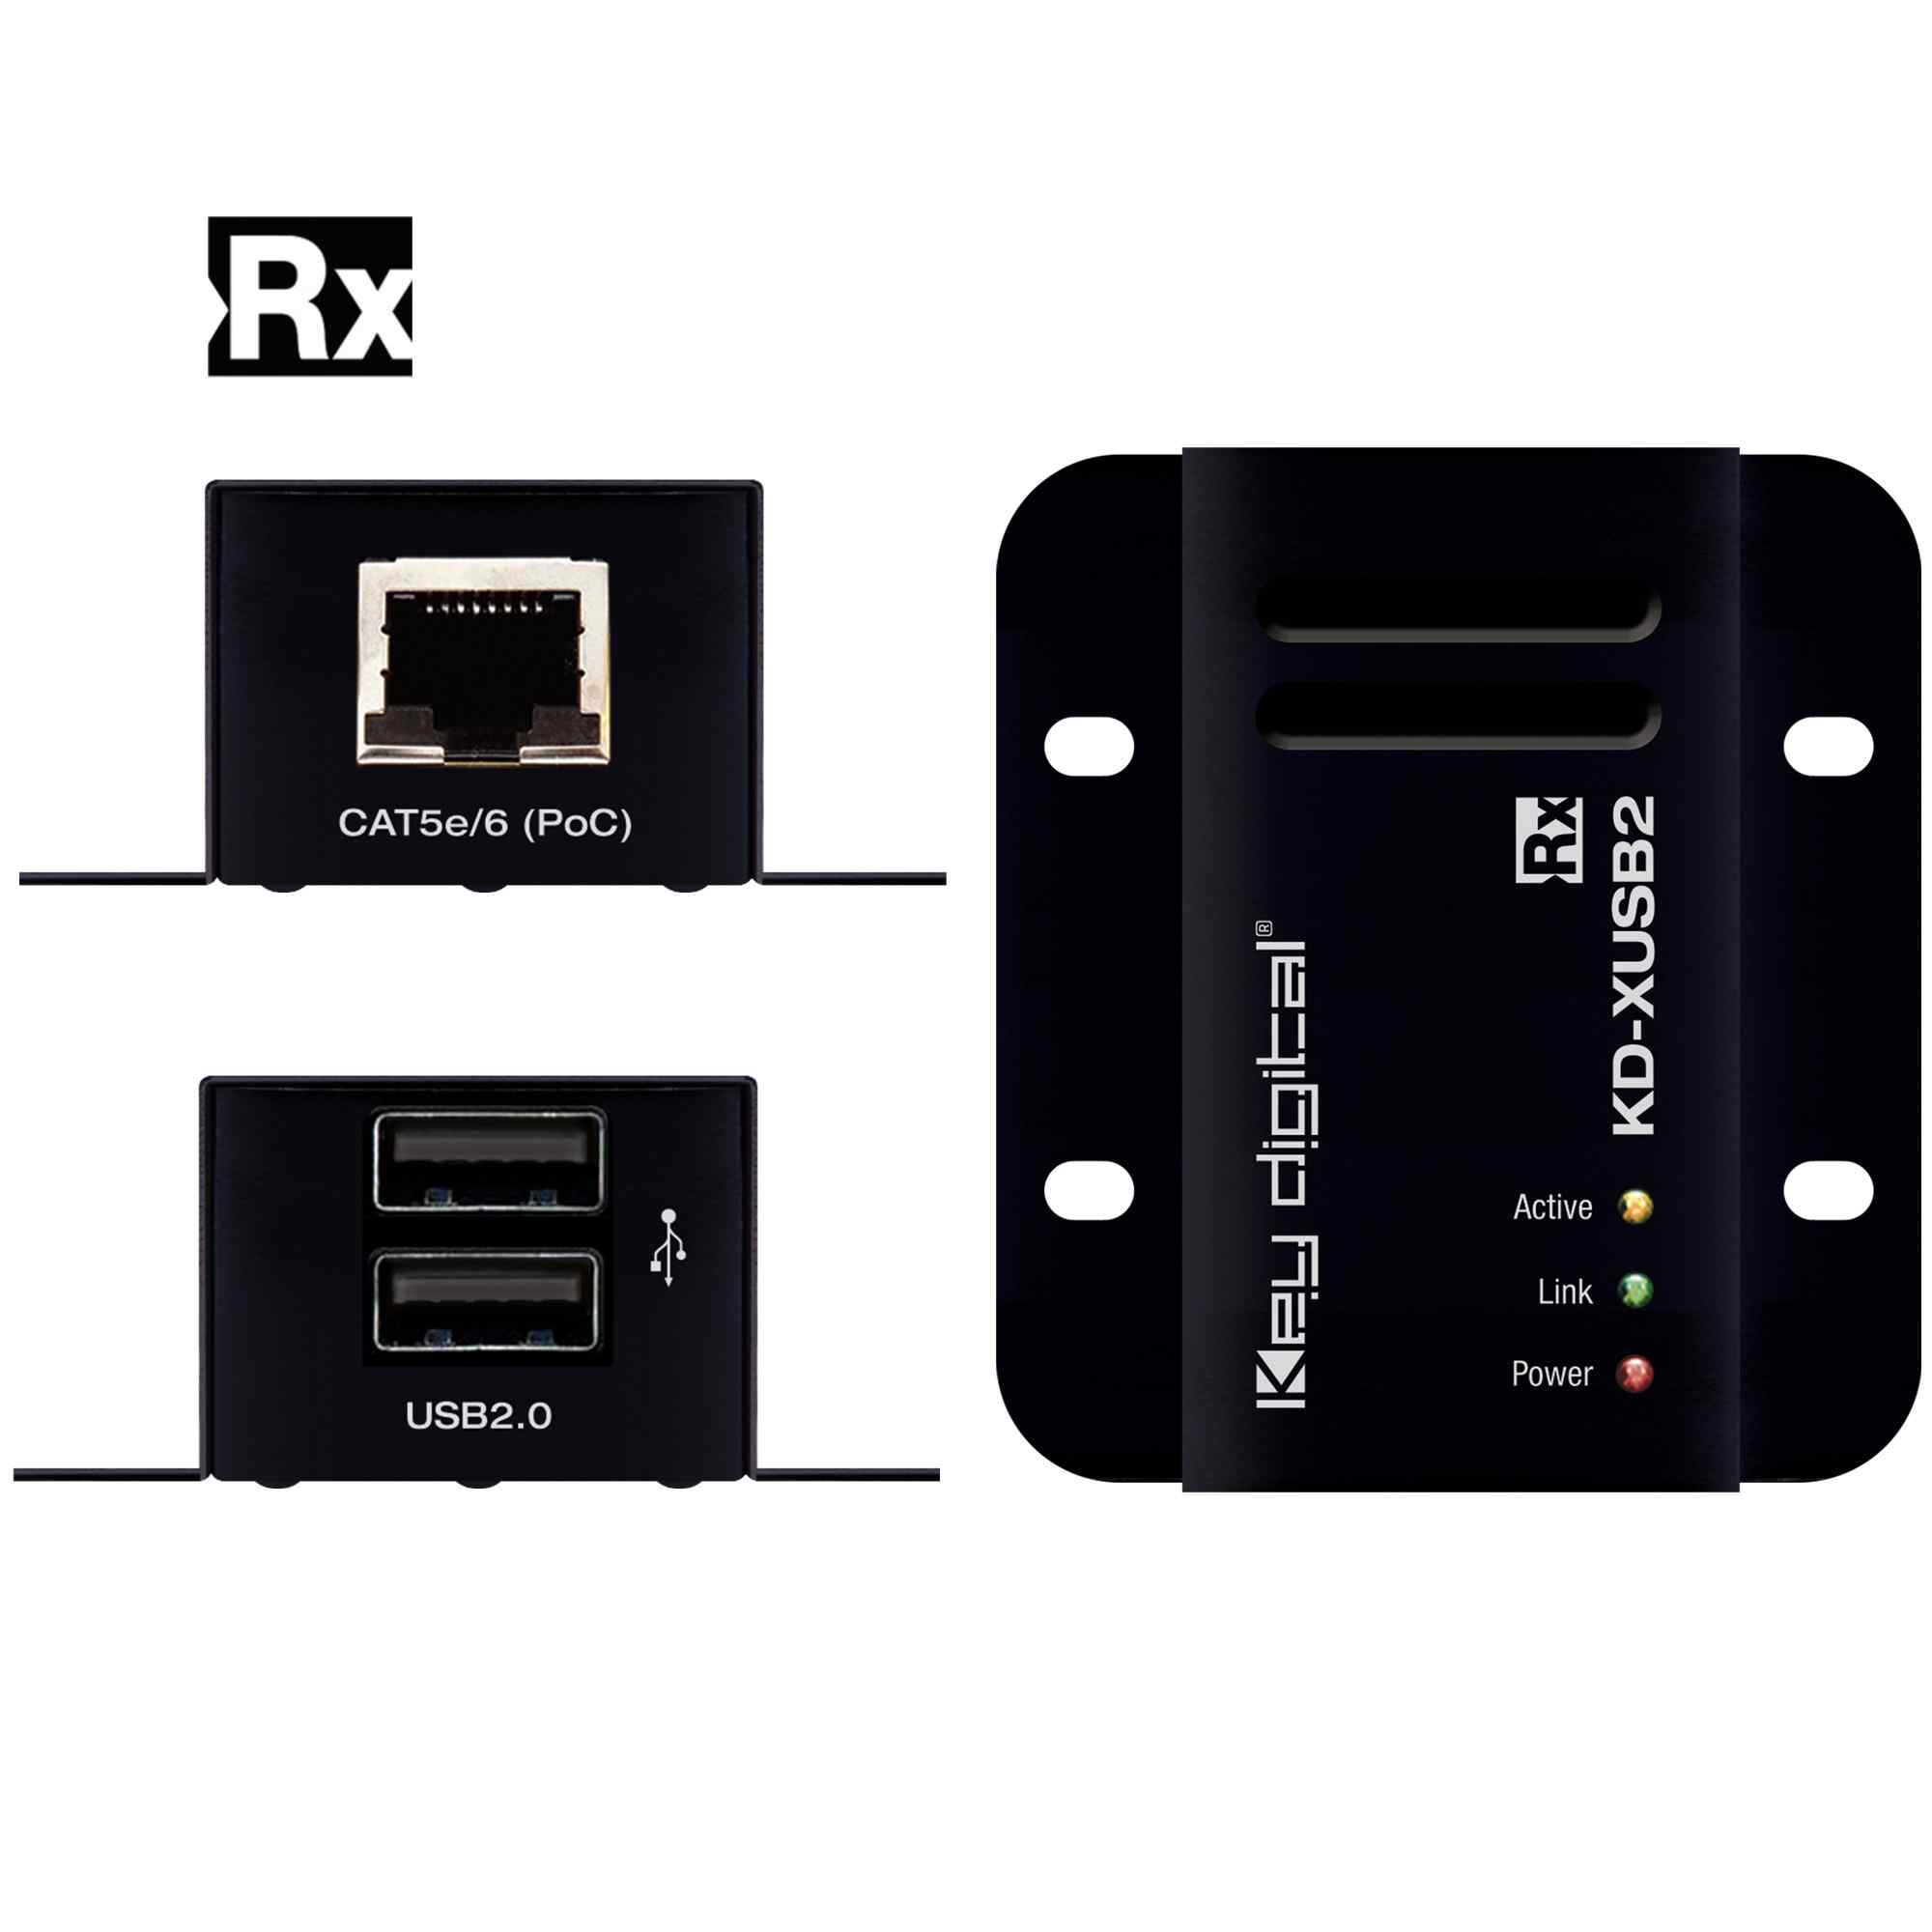 Thumbnail of Rx usb cat5 extender front and rear